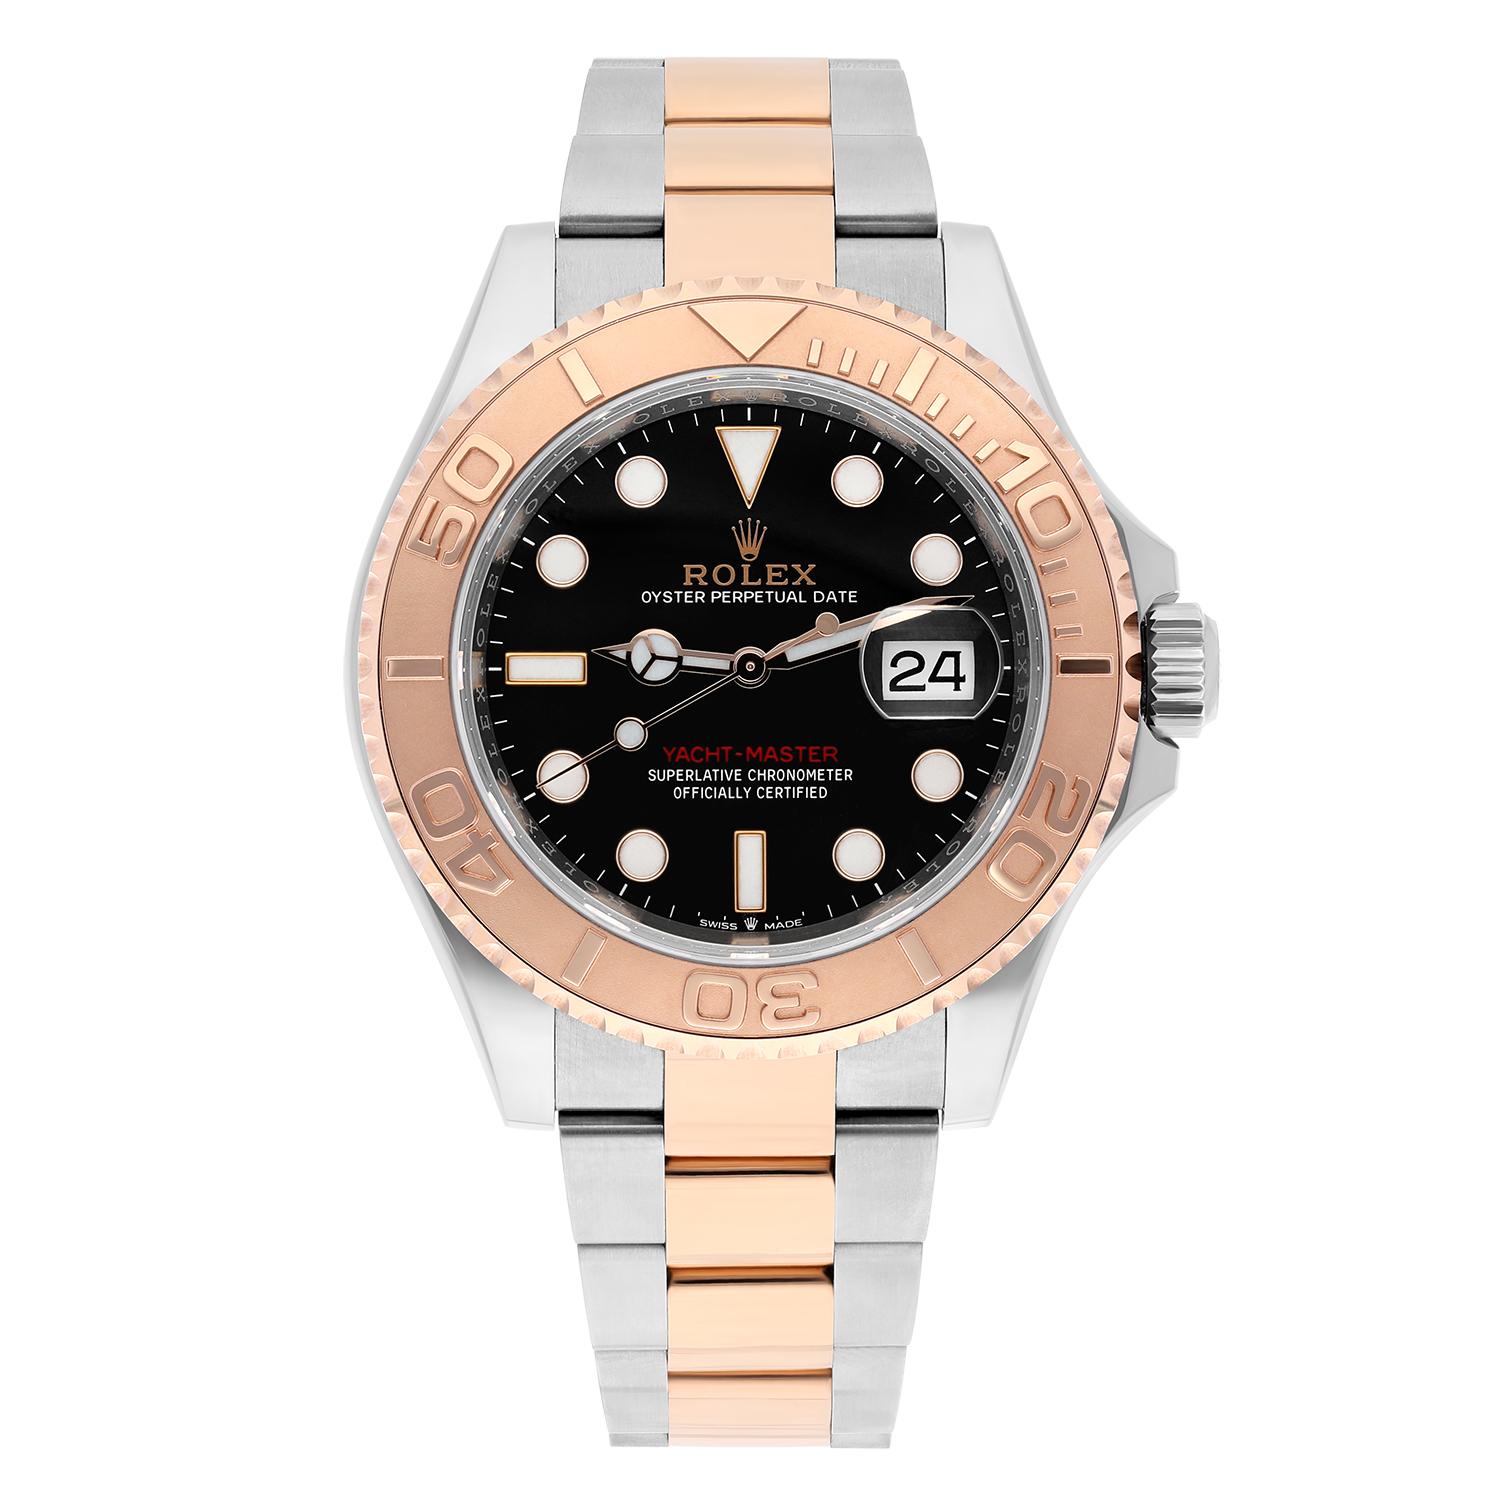 This Yacht-Master 40 is fitted with the solid 18ct rose gold bi-directional bezel, contrasting beautifully against the black luminous dial. Fitted to the sporty yet elegant two-tone Oyster bracelet. Rolex self-winding calibre 3235, with improved